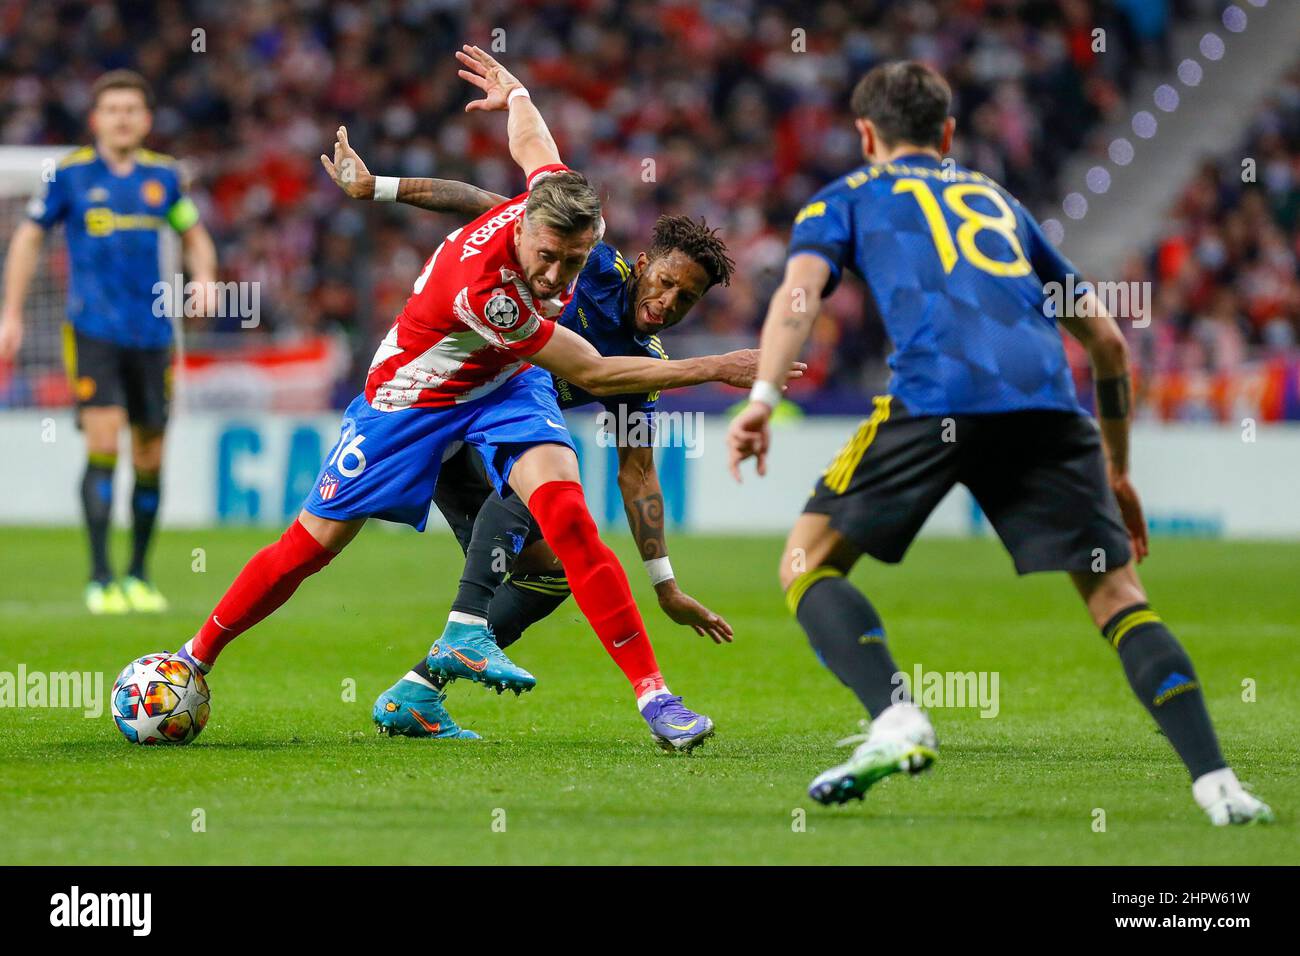 MADRID, SPAIN - FEBRUARY 23: Hector Herrera of Club Atletico de Madrid, Fred of Manchester United during the UEFA Champions League match between Club Atlético de Madrid and Manchester United at the Estadio Metropolitano on February 23, 2022 in Madrid, Spain (Photo by DAX Images/Orange Pictures) Stock Photo